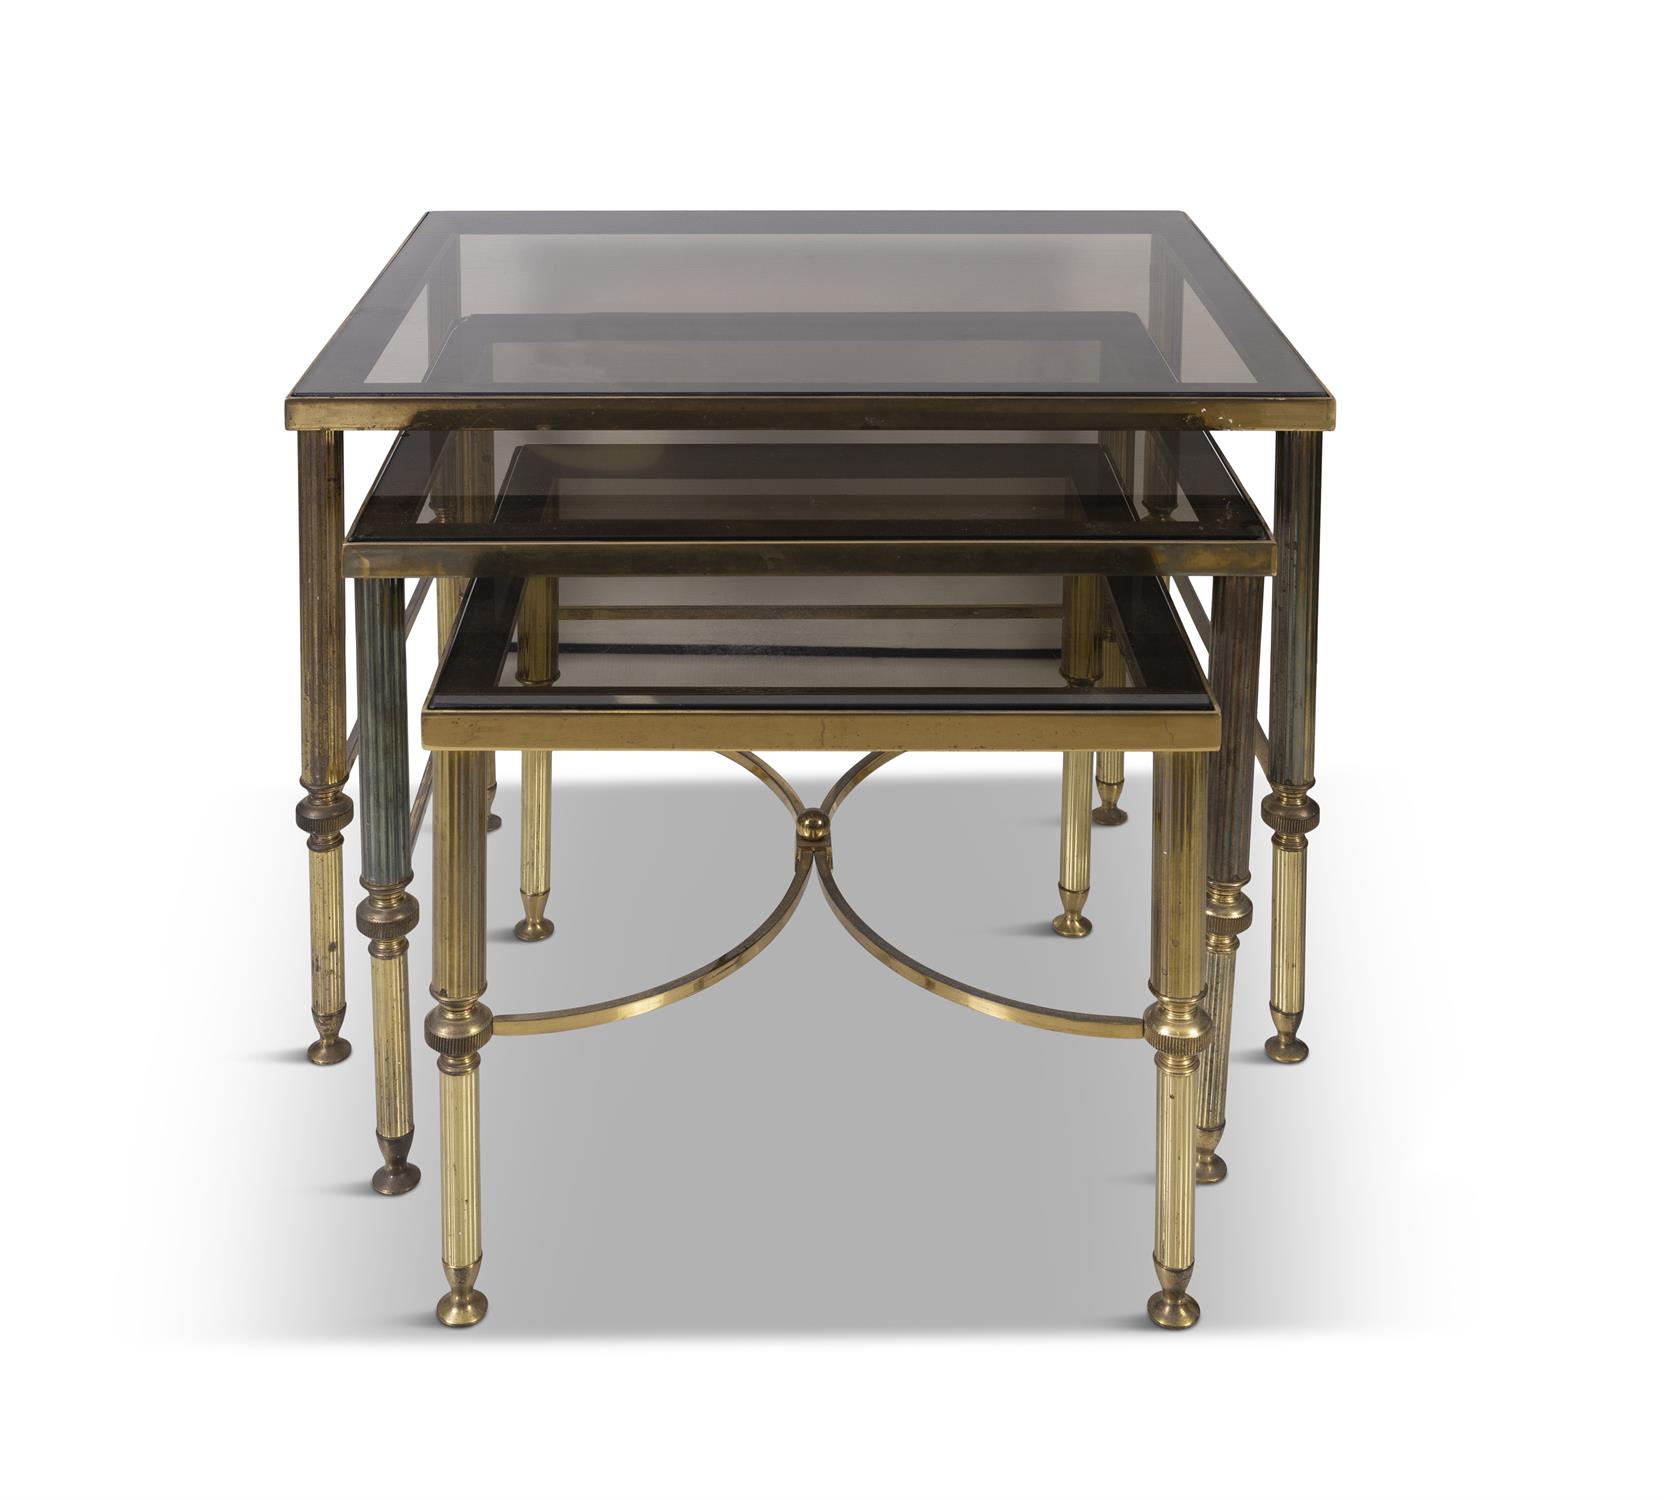 SIDE TABLES Trio nest of brass side tables with smoked glass tops. Italy, c.1970. 56.5 x 46. - Image 4 of 4